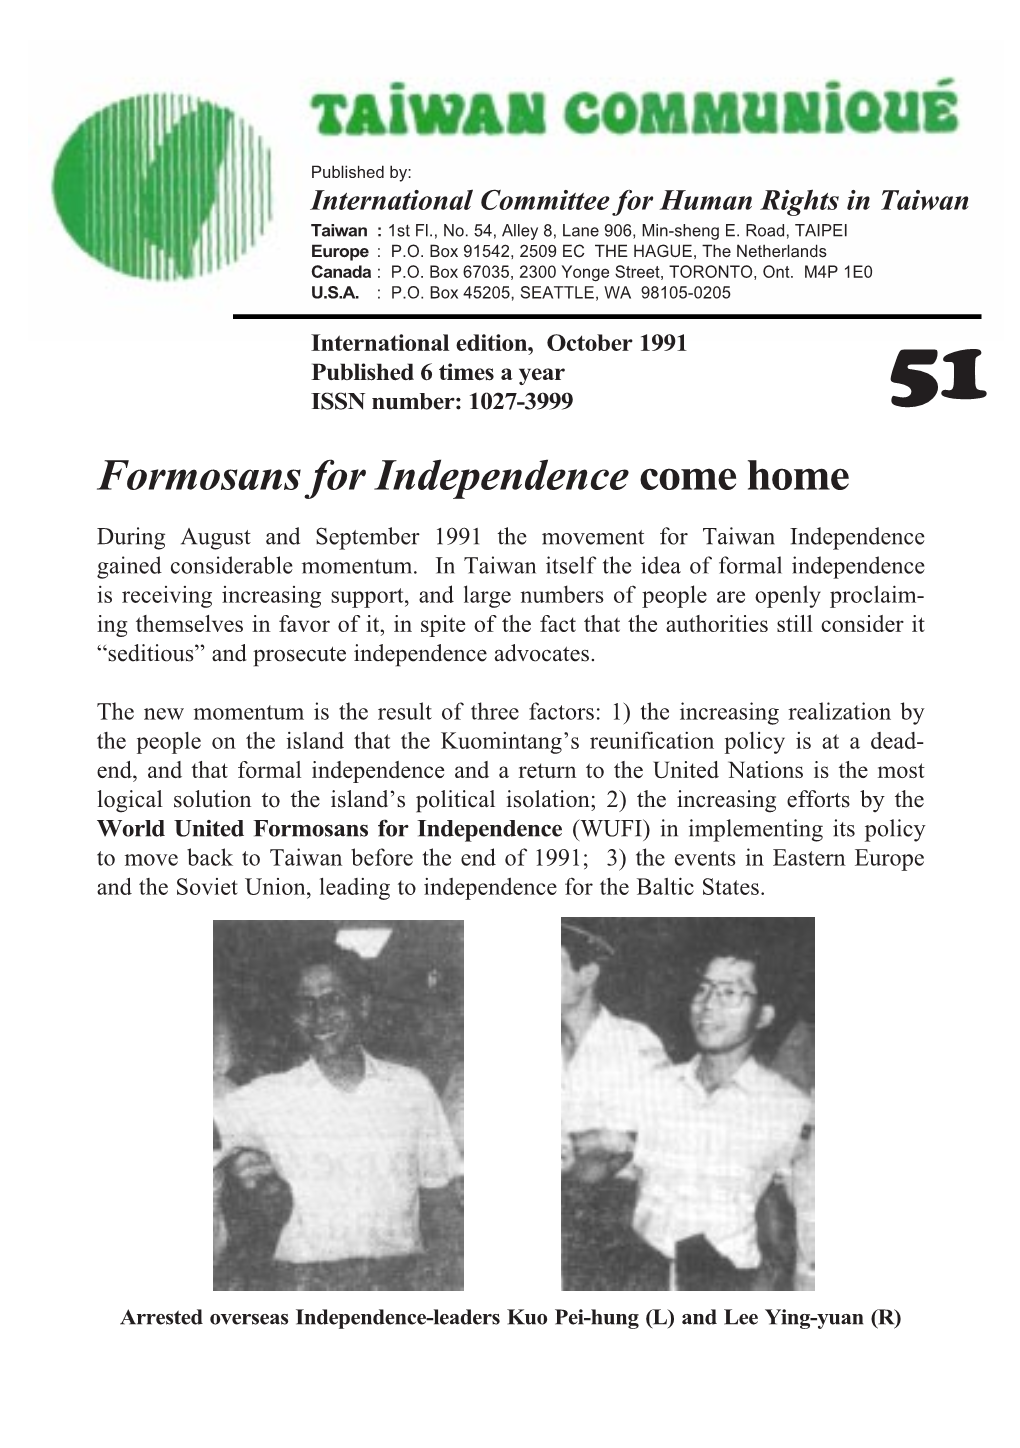 Formosans for Independence Come Home During August and September 1991 the Movement for Taiwan Independence Gained Considerable Momentum